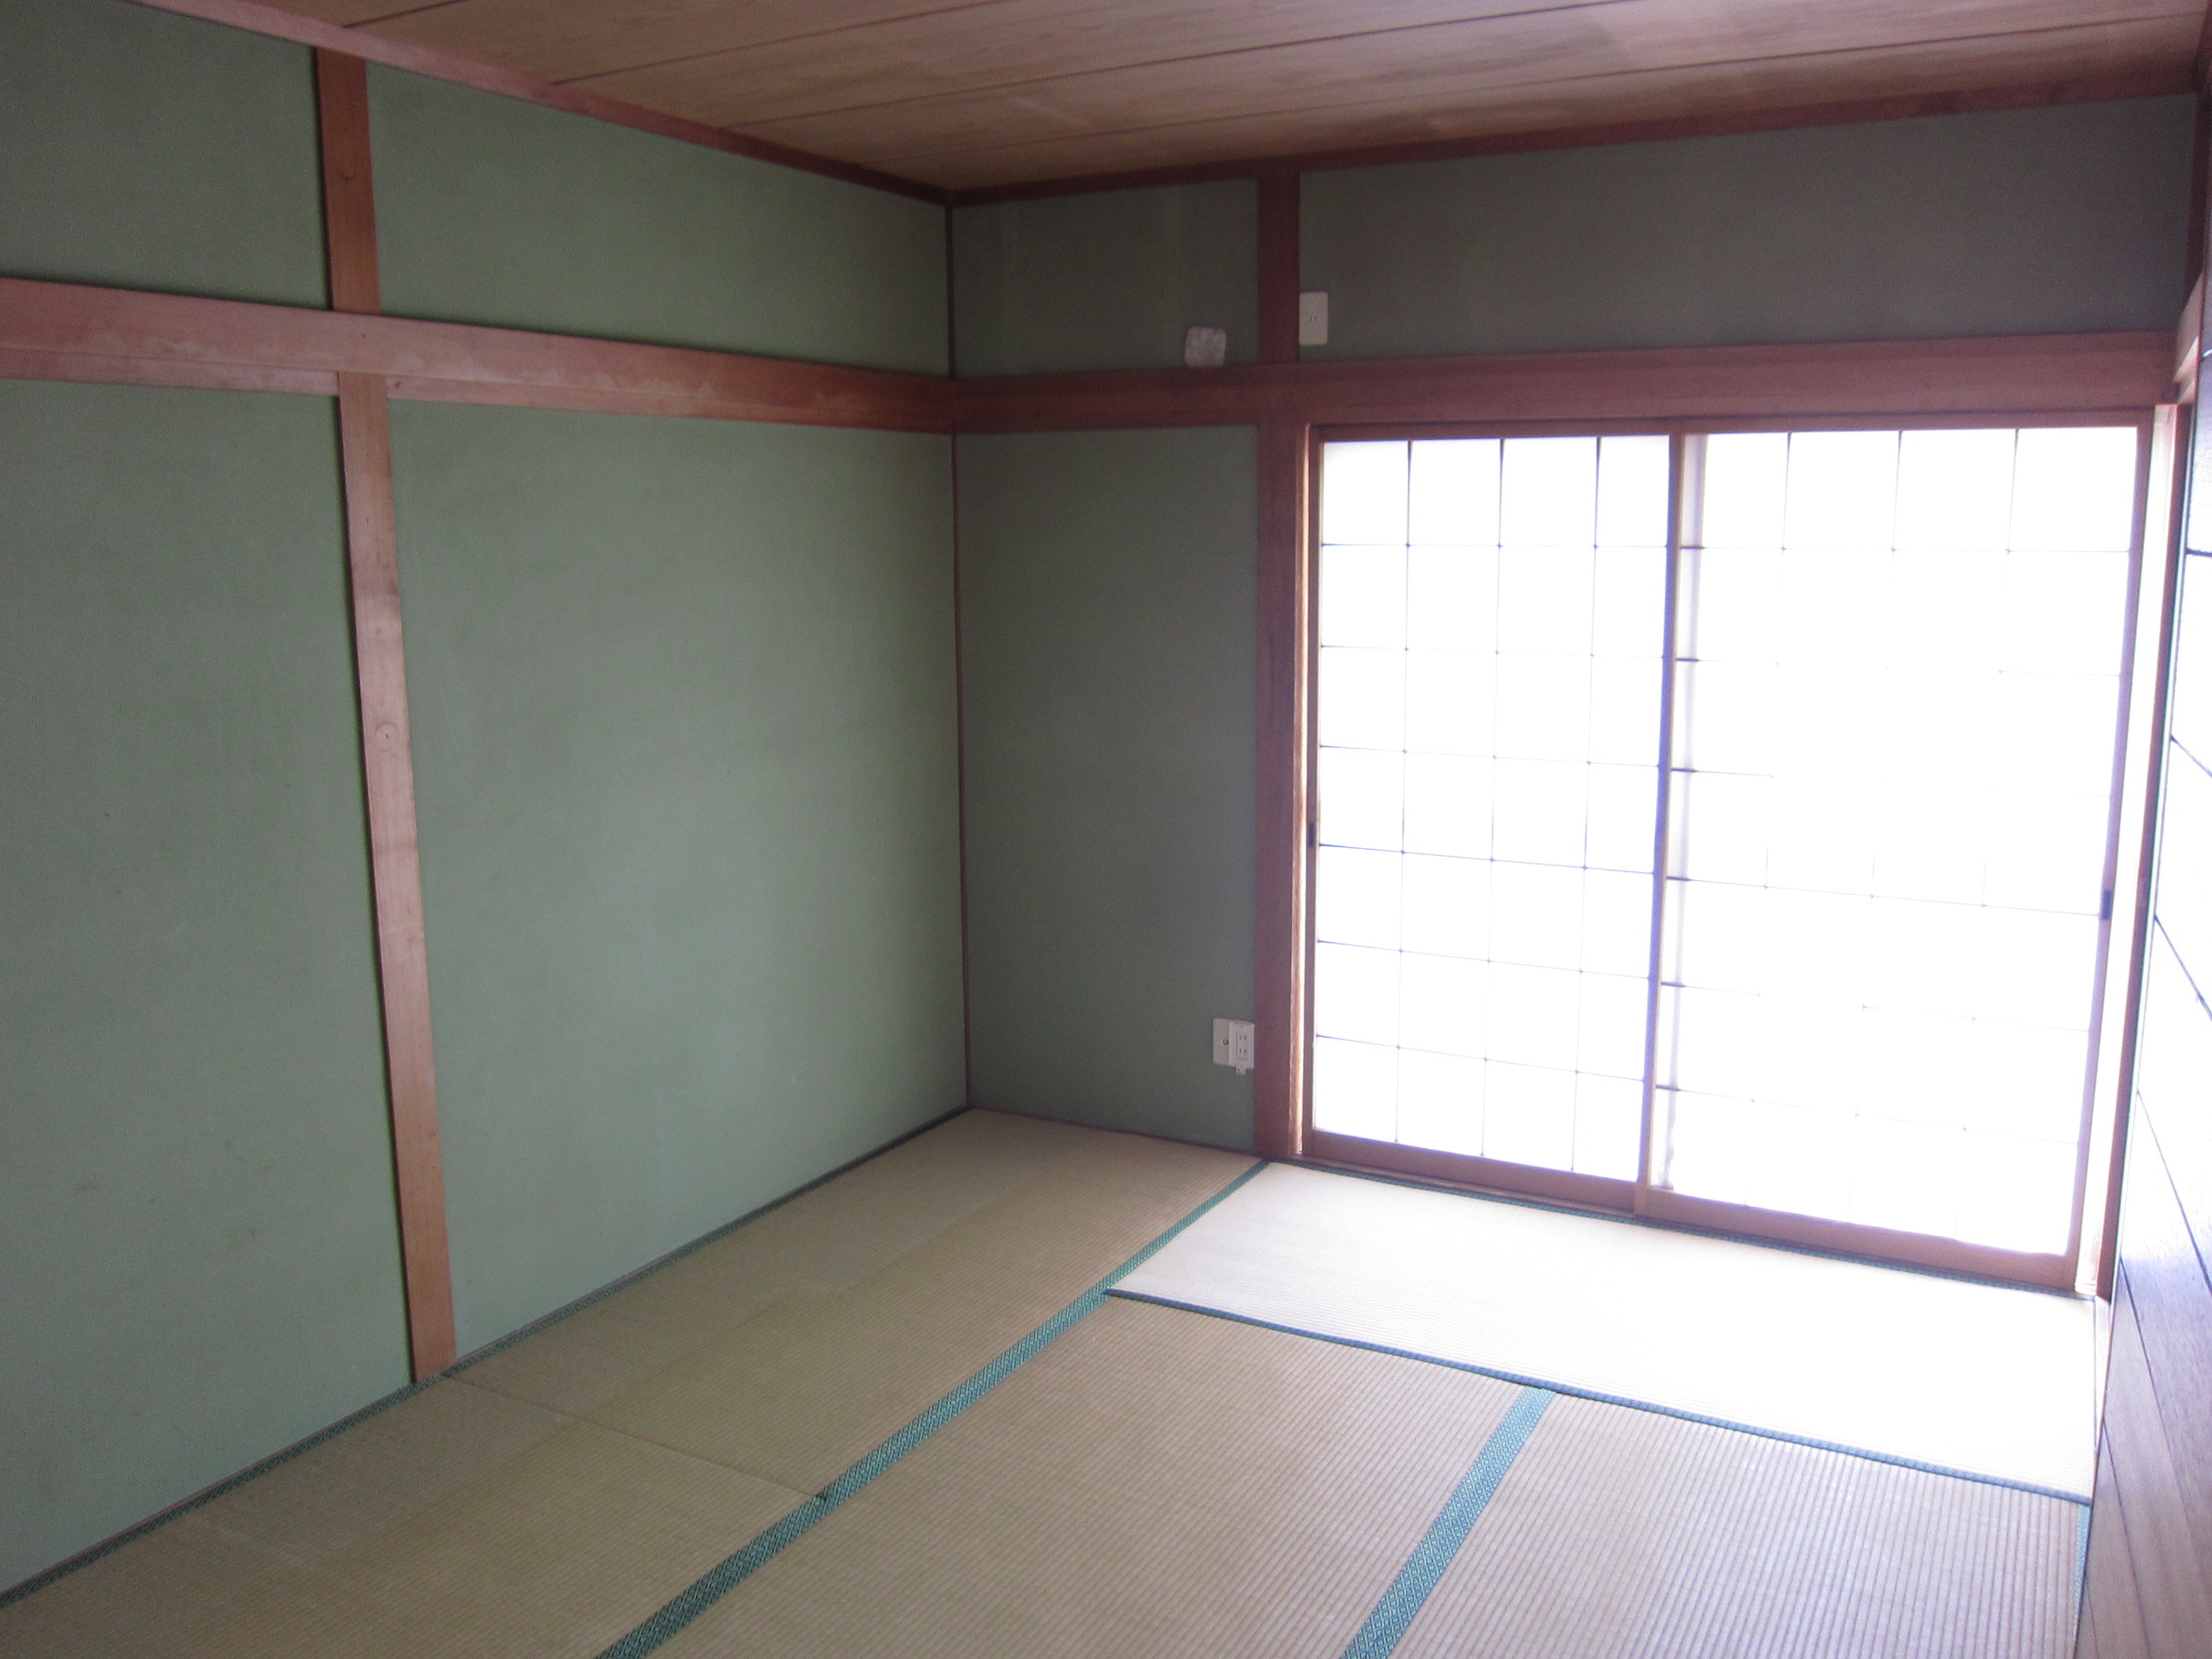 Living and room. It is the first floor of a Japanese-style room!